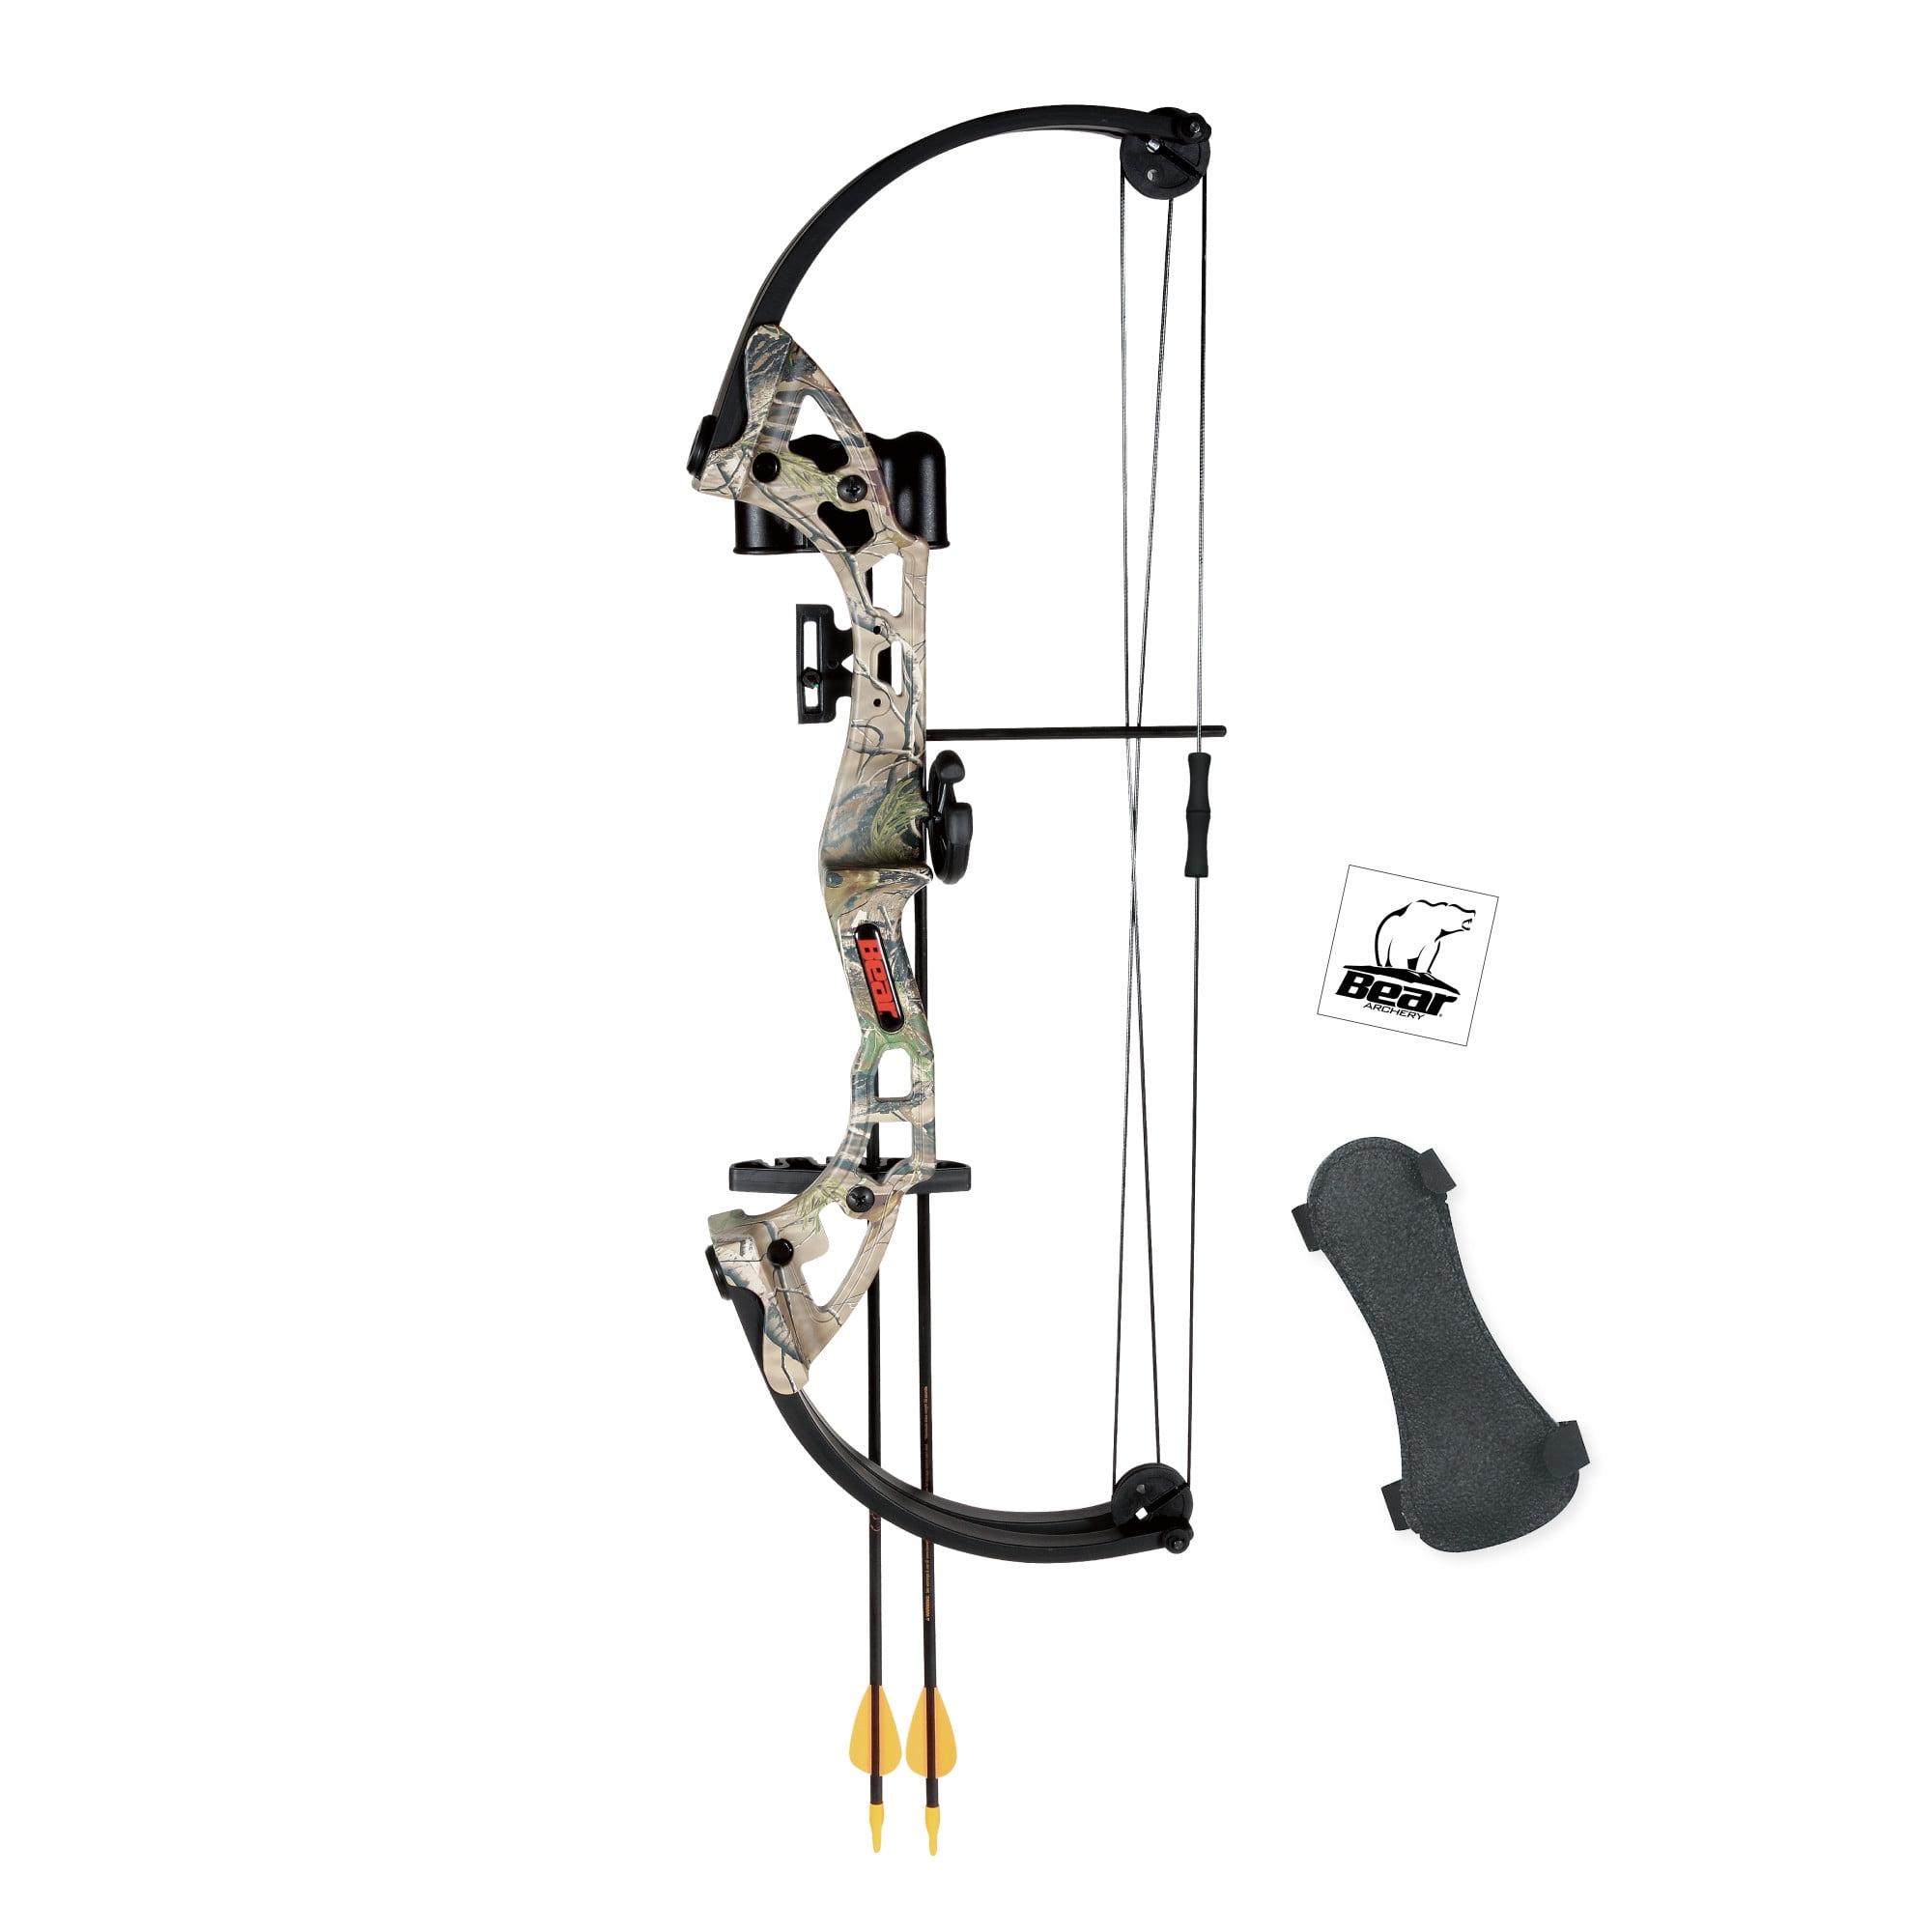 Bear archery bows best price guarantee at dick'sdick's sporting goods